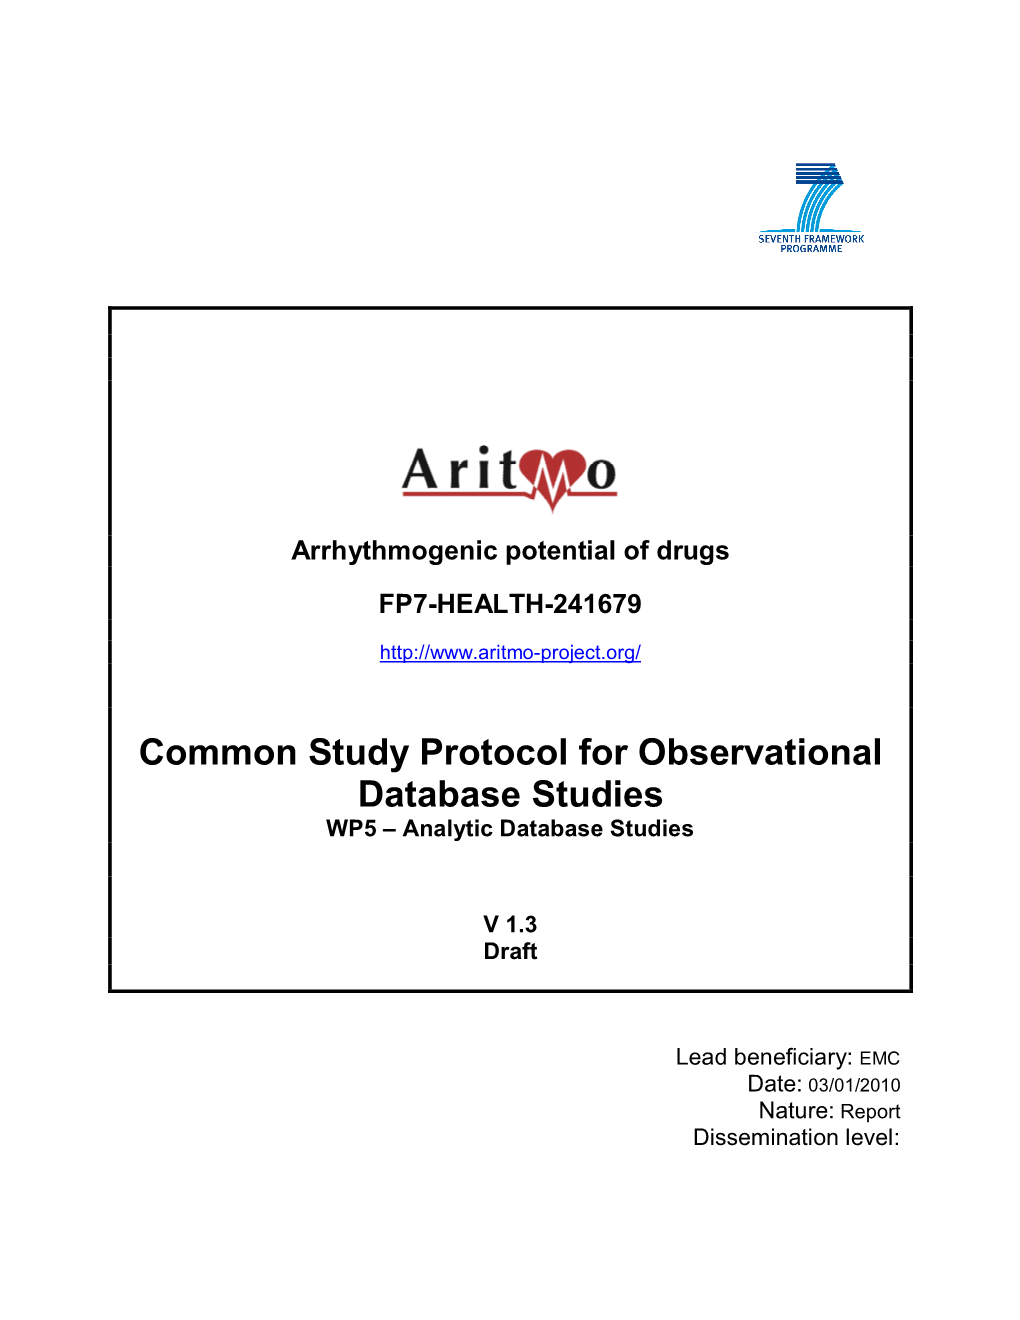 Common Study Protocol for Observational Database Studies WP5 – Analytic Database Studies